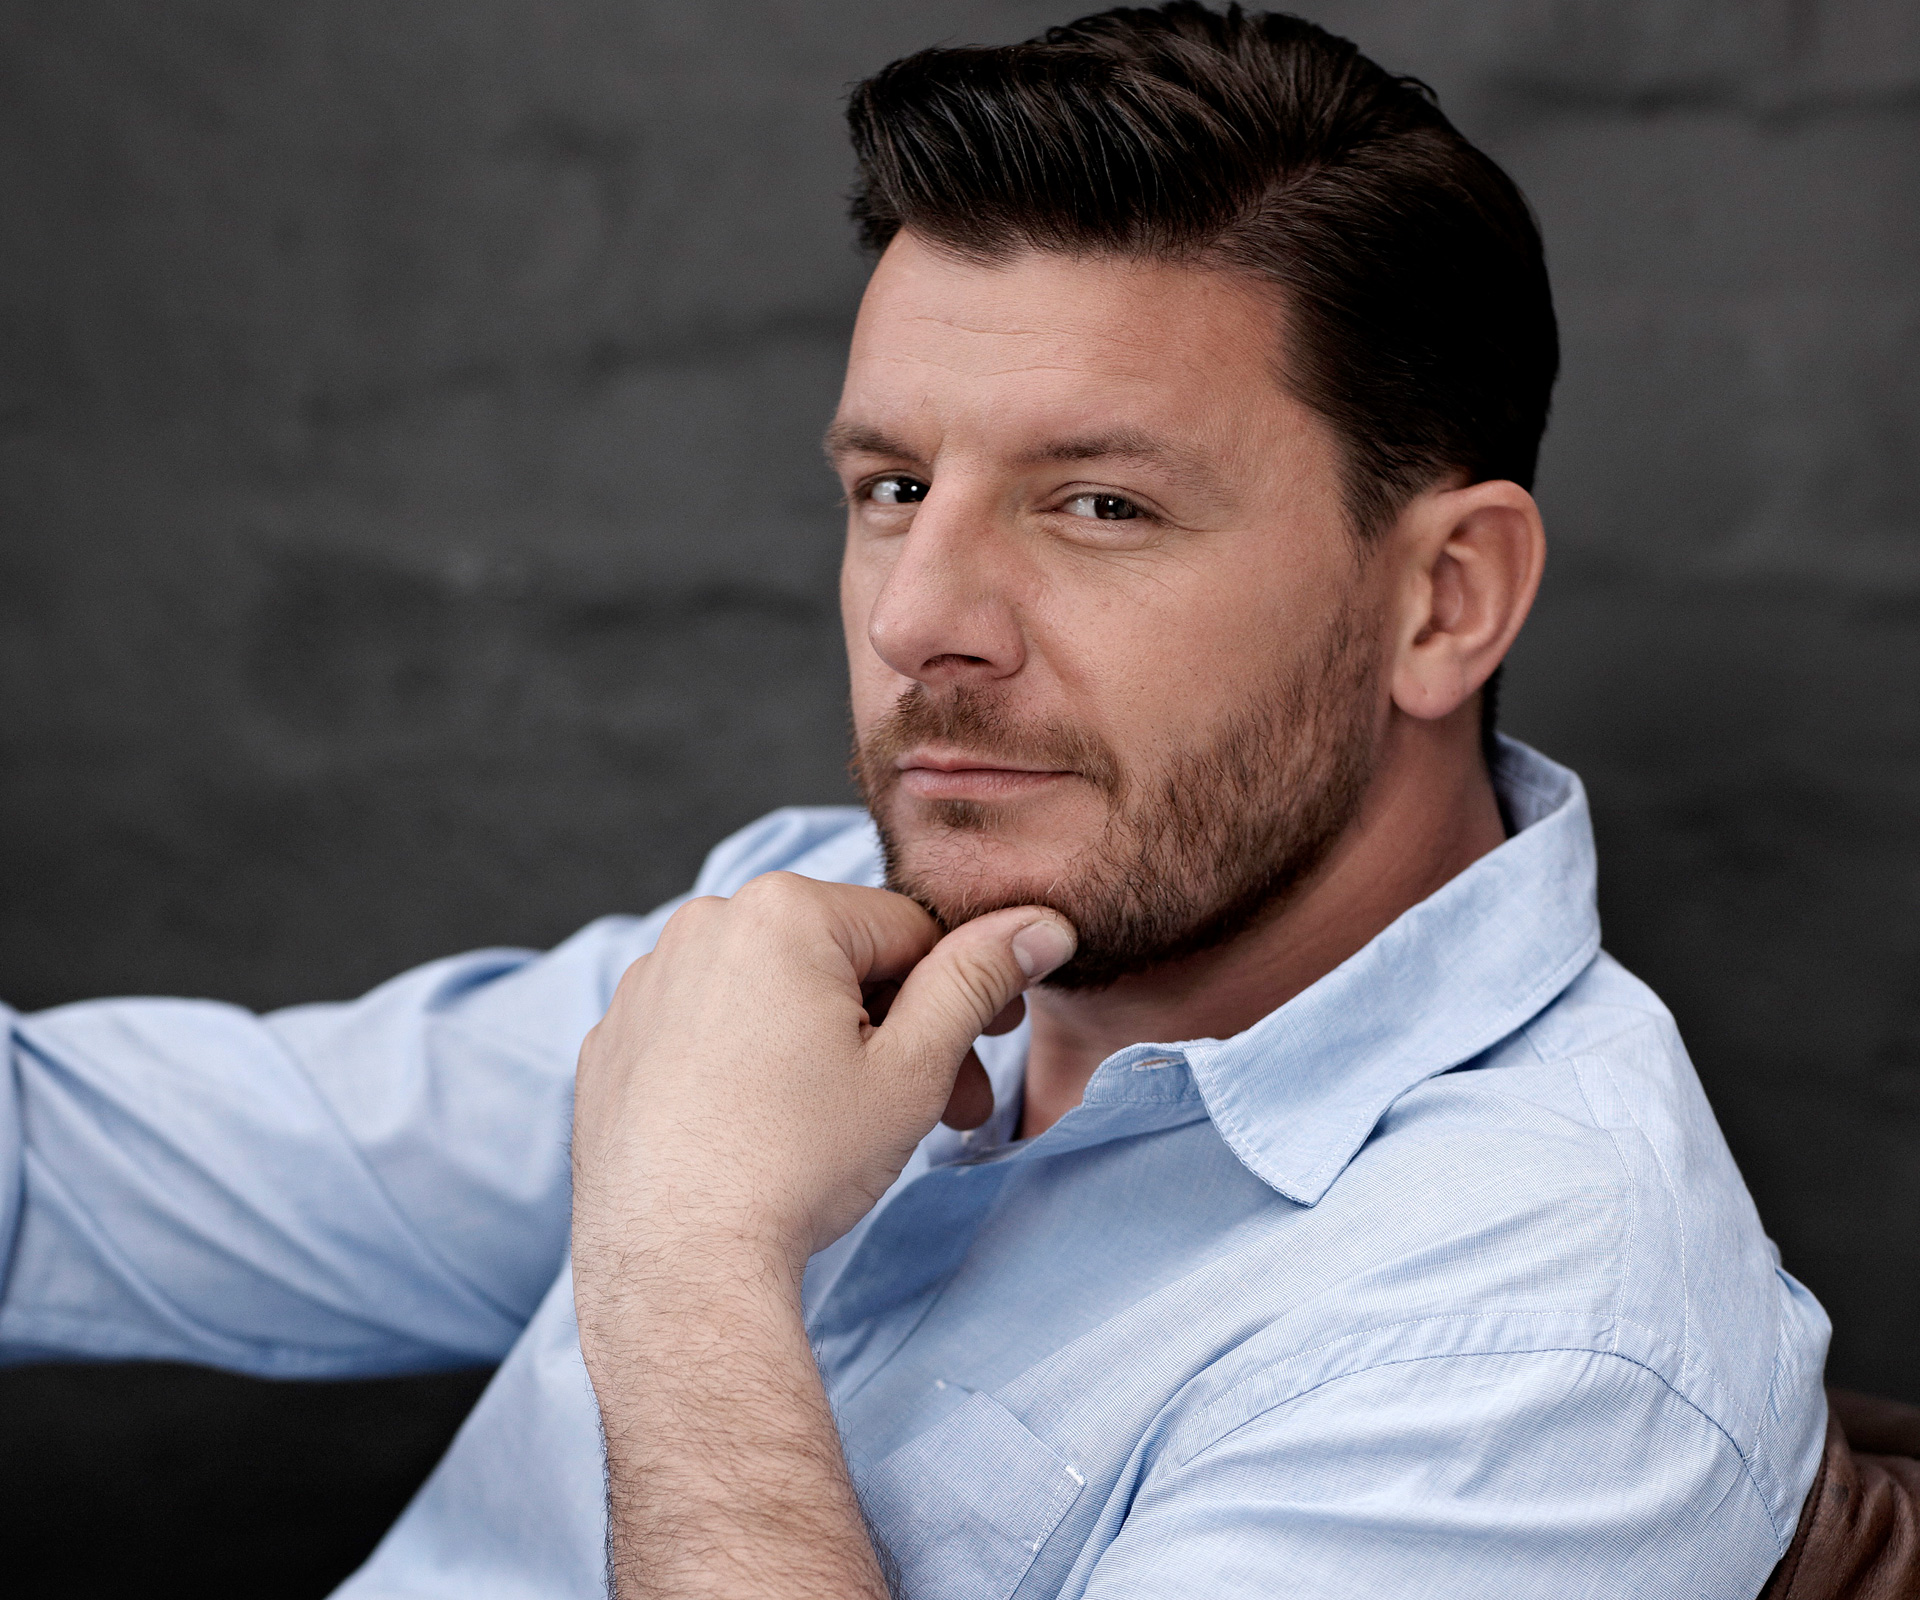 MKR’s Manu Feildel on family, fun and food